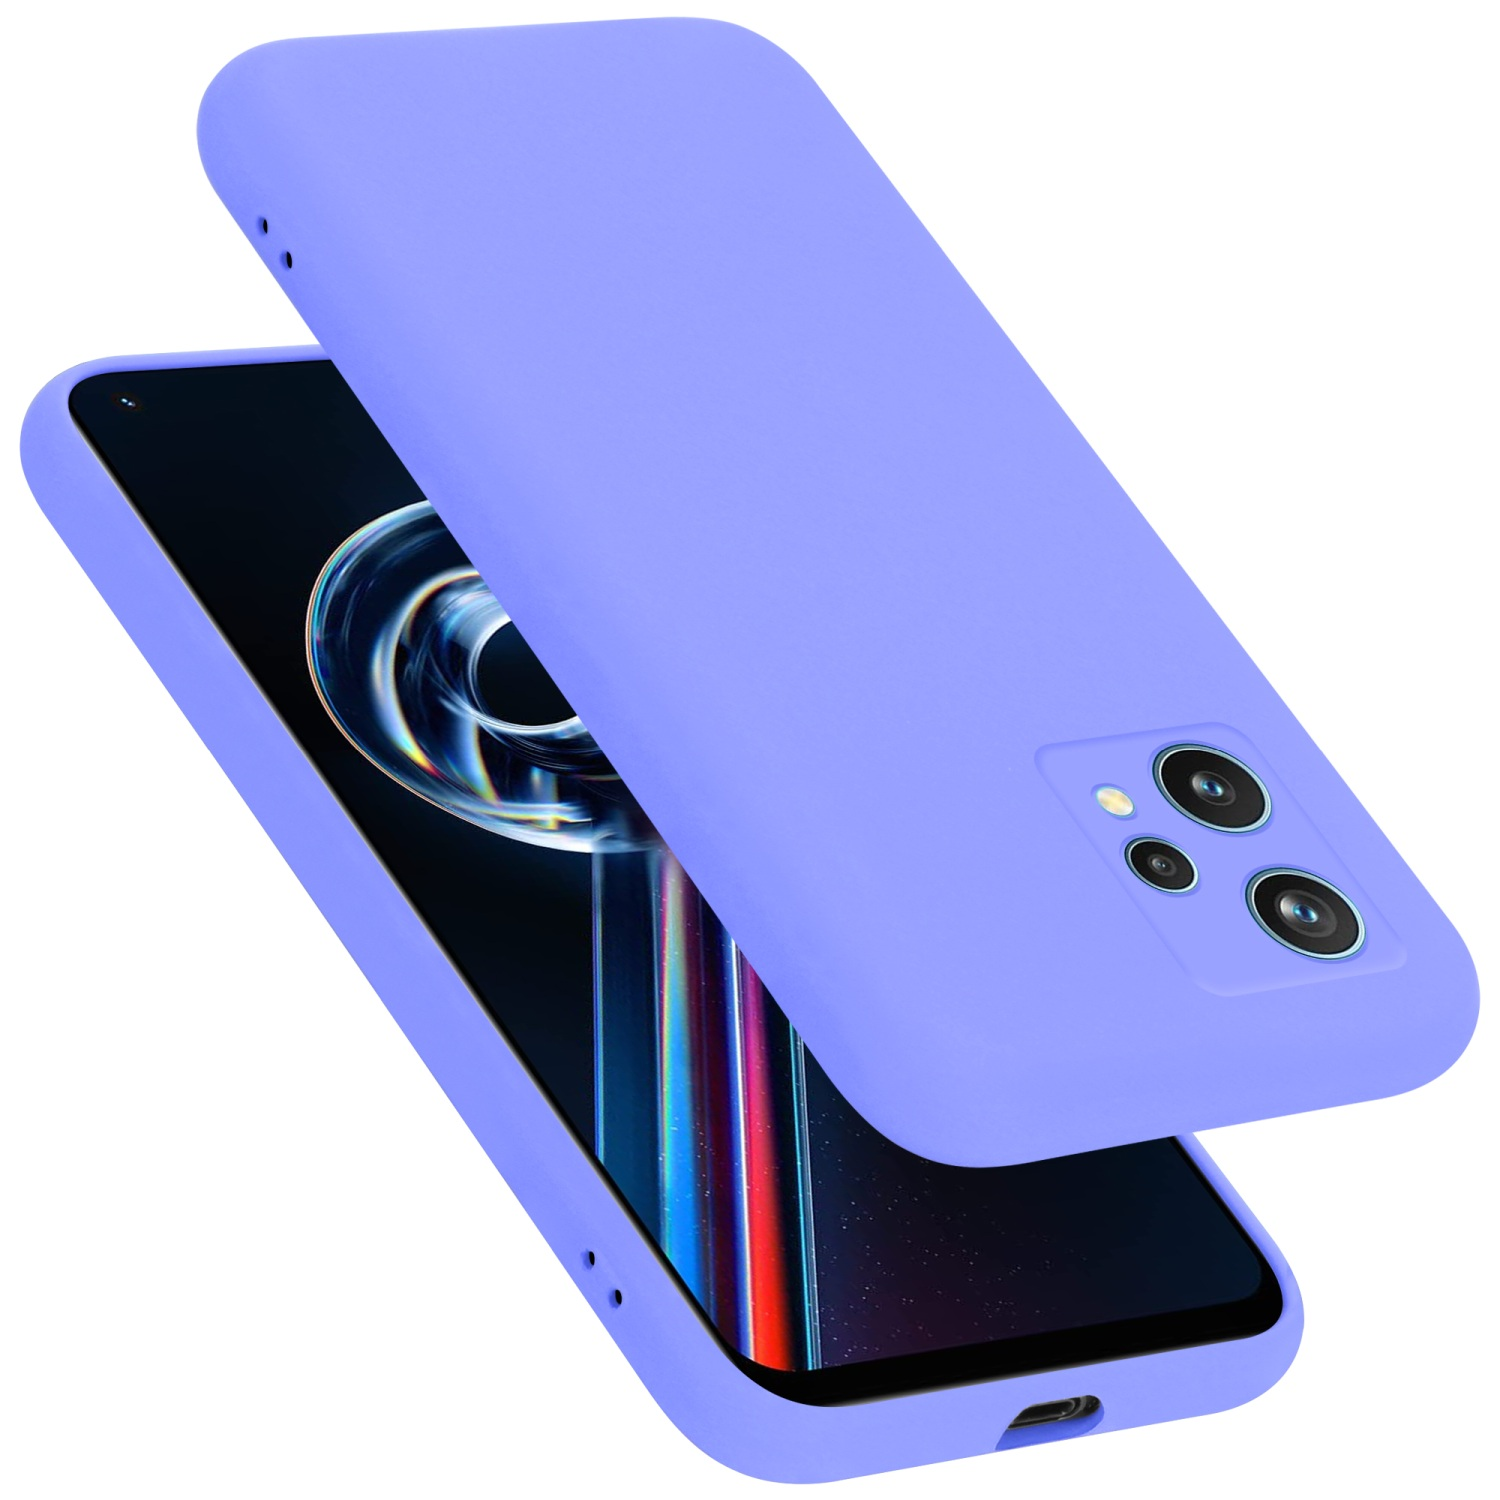 Style, 5G / / 9 / Liquid Nord Realme, LIQUID HELL CADORABO LITE V25 CE LILA Backcover, Silicone Hülle Q5 OnePlus / im Case 2 5G, PRO 9